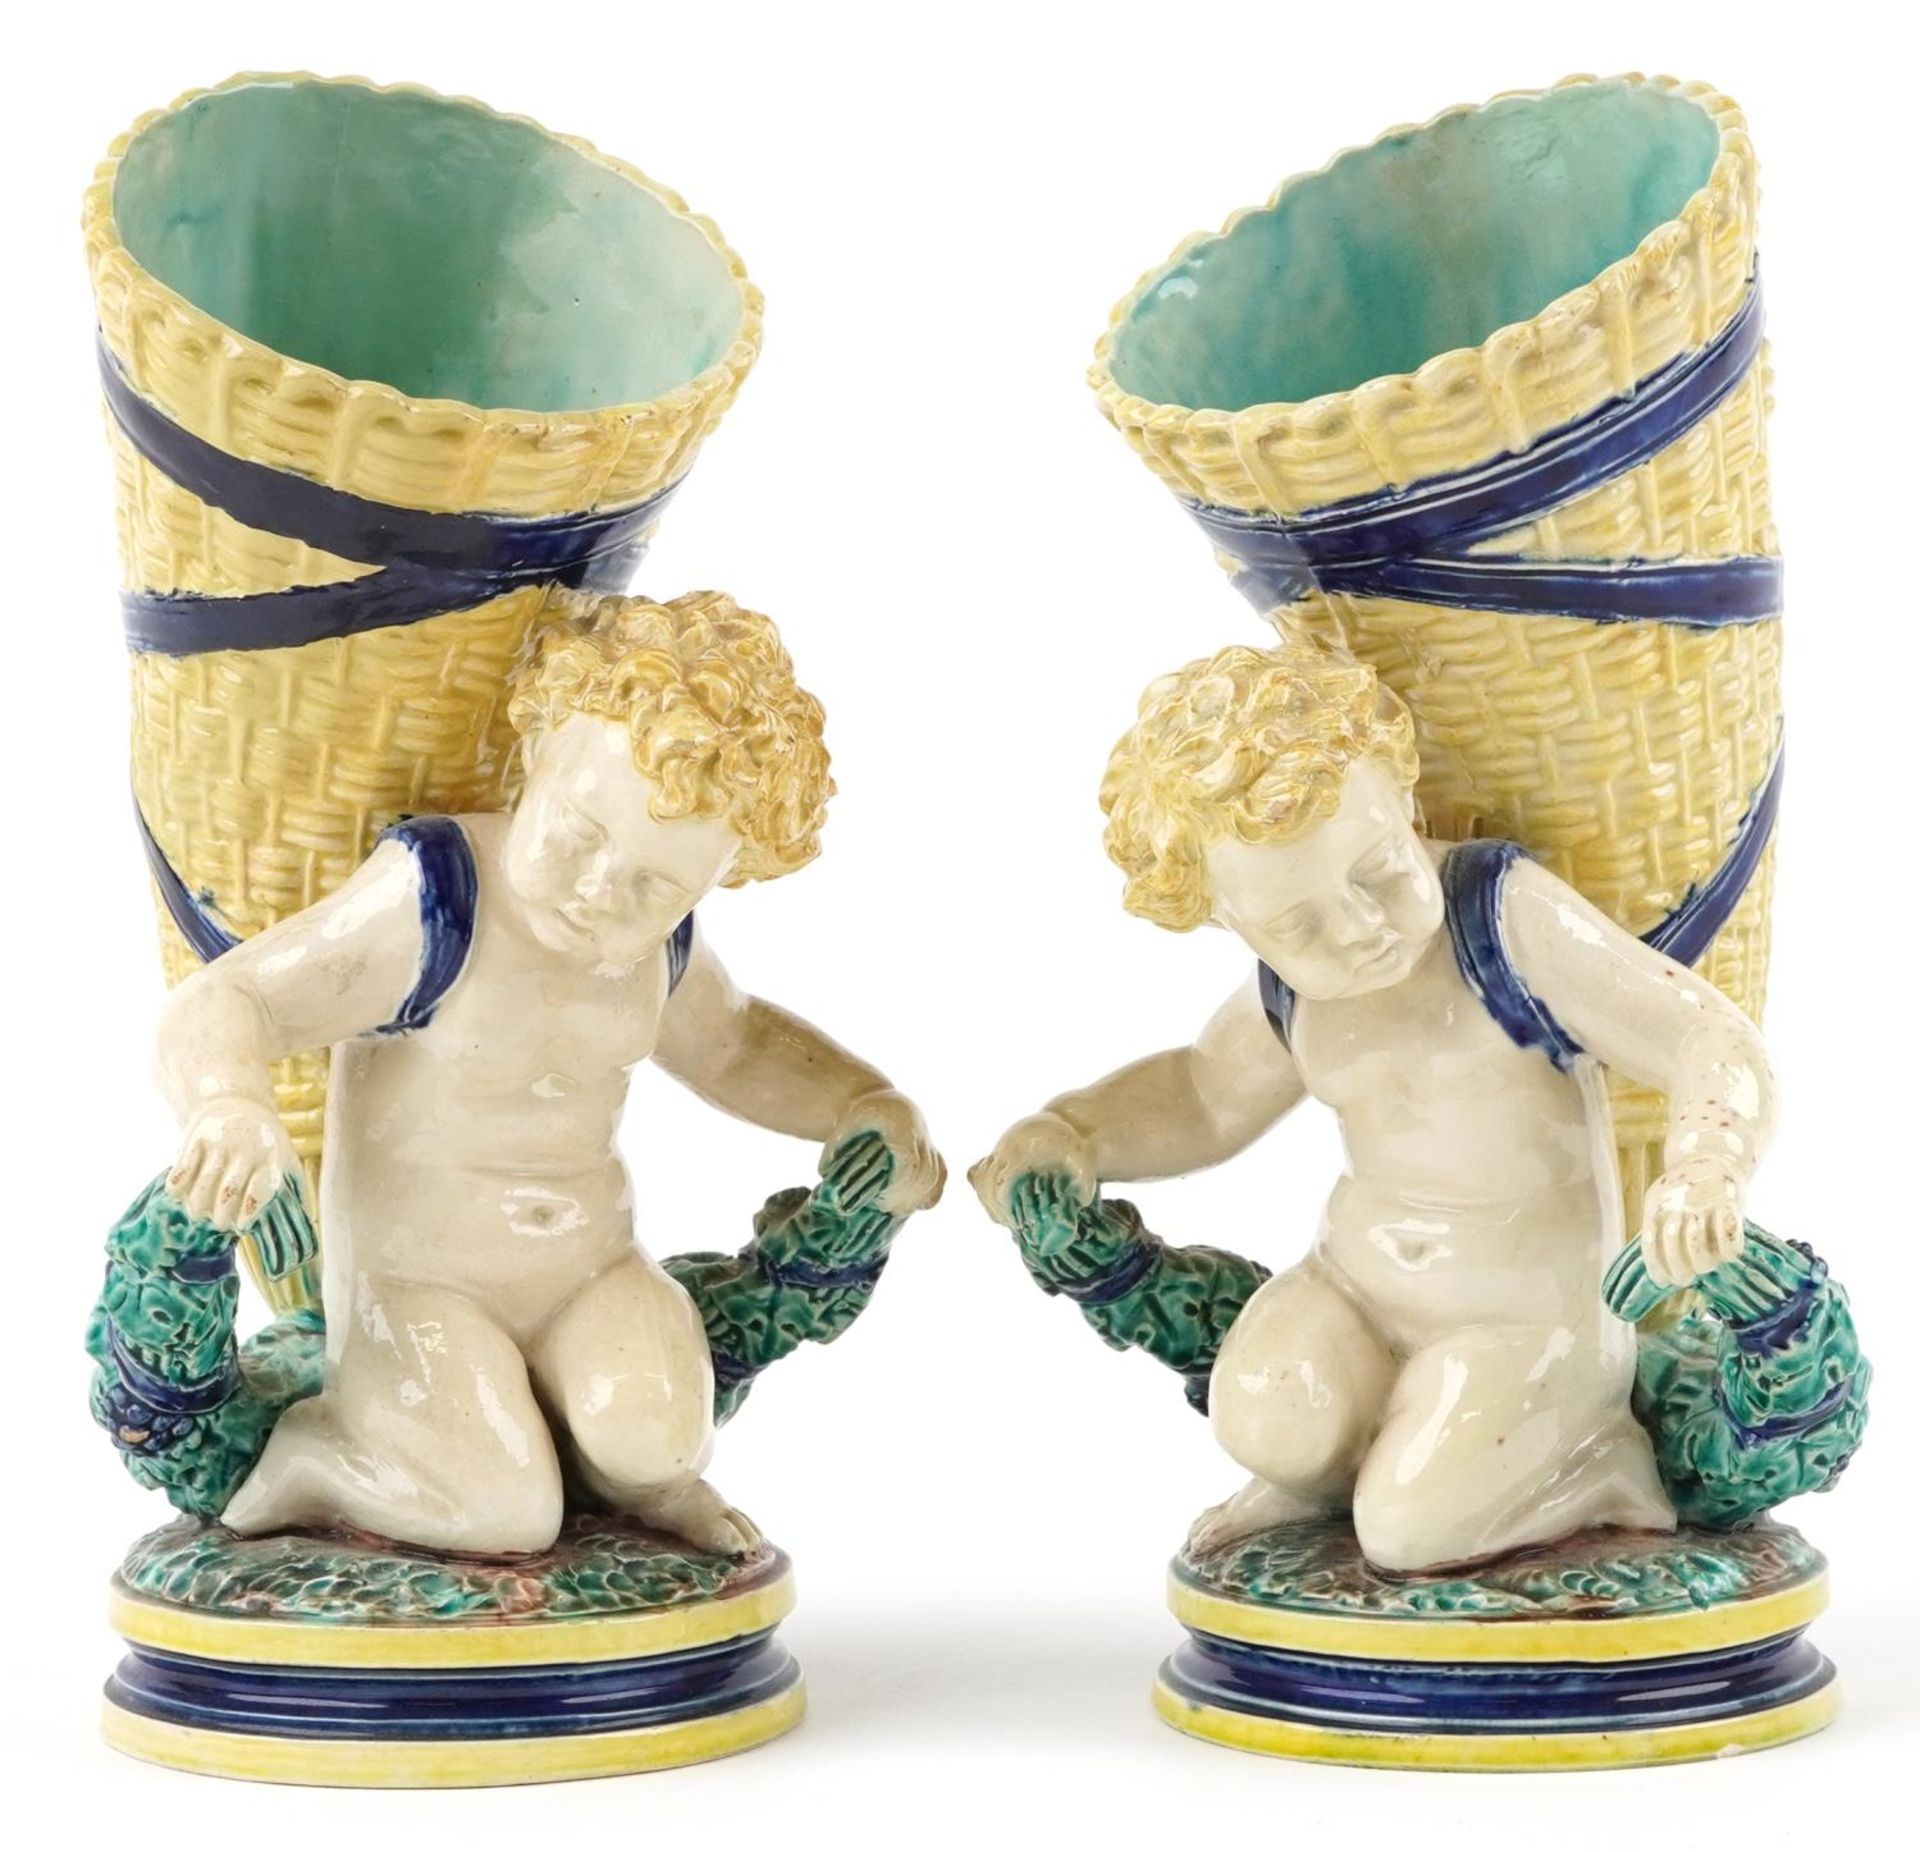 Pair of 19th century European Maiolica vases in the form of Putti carrying cornucopia, each with